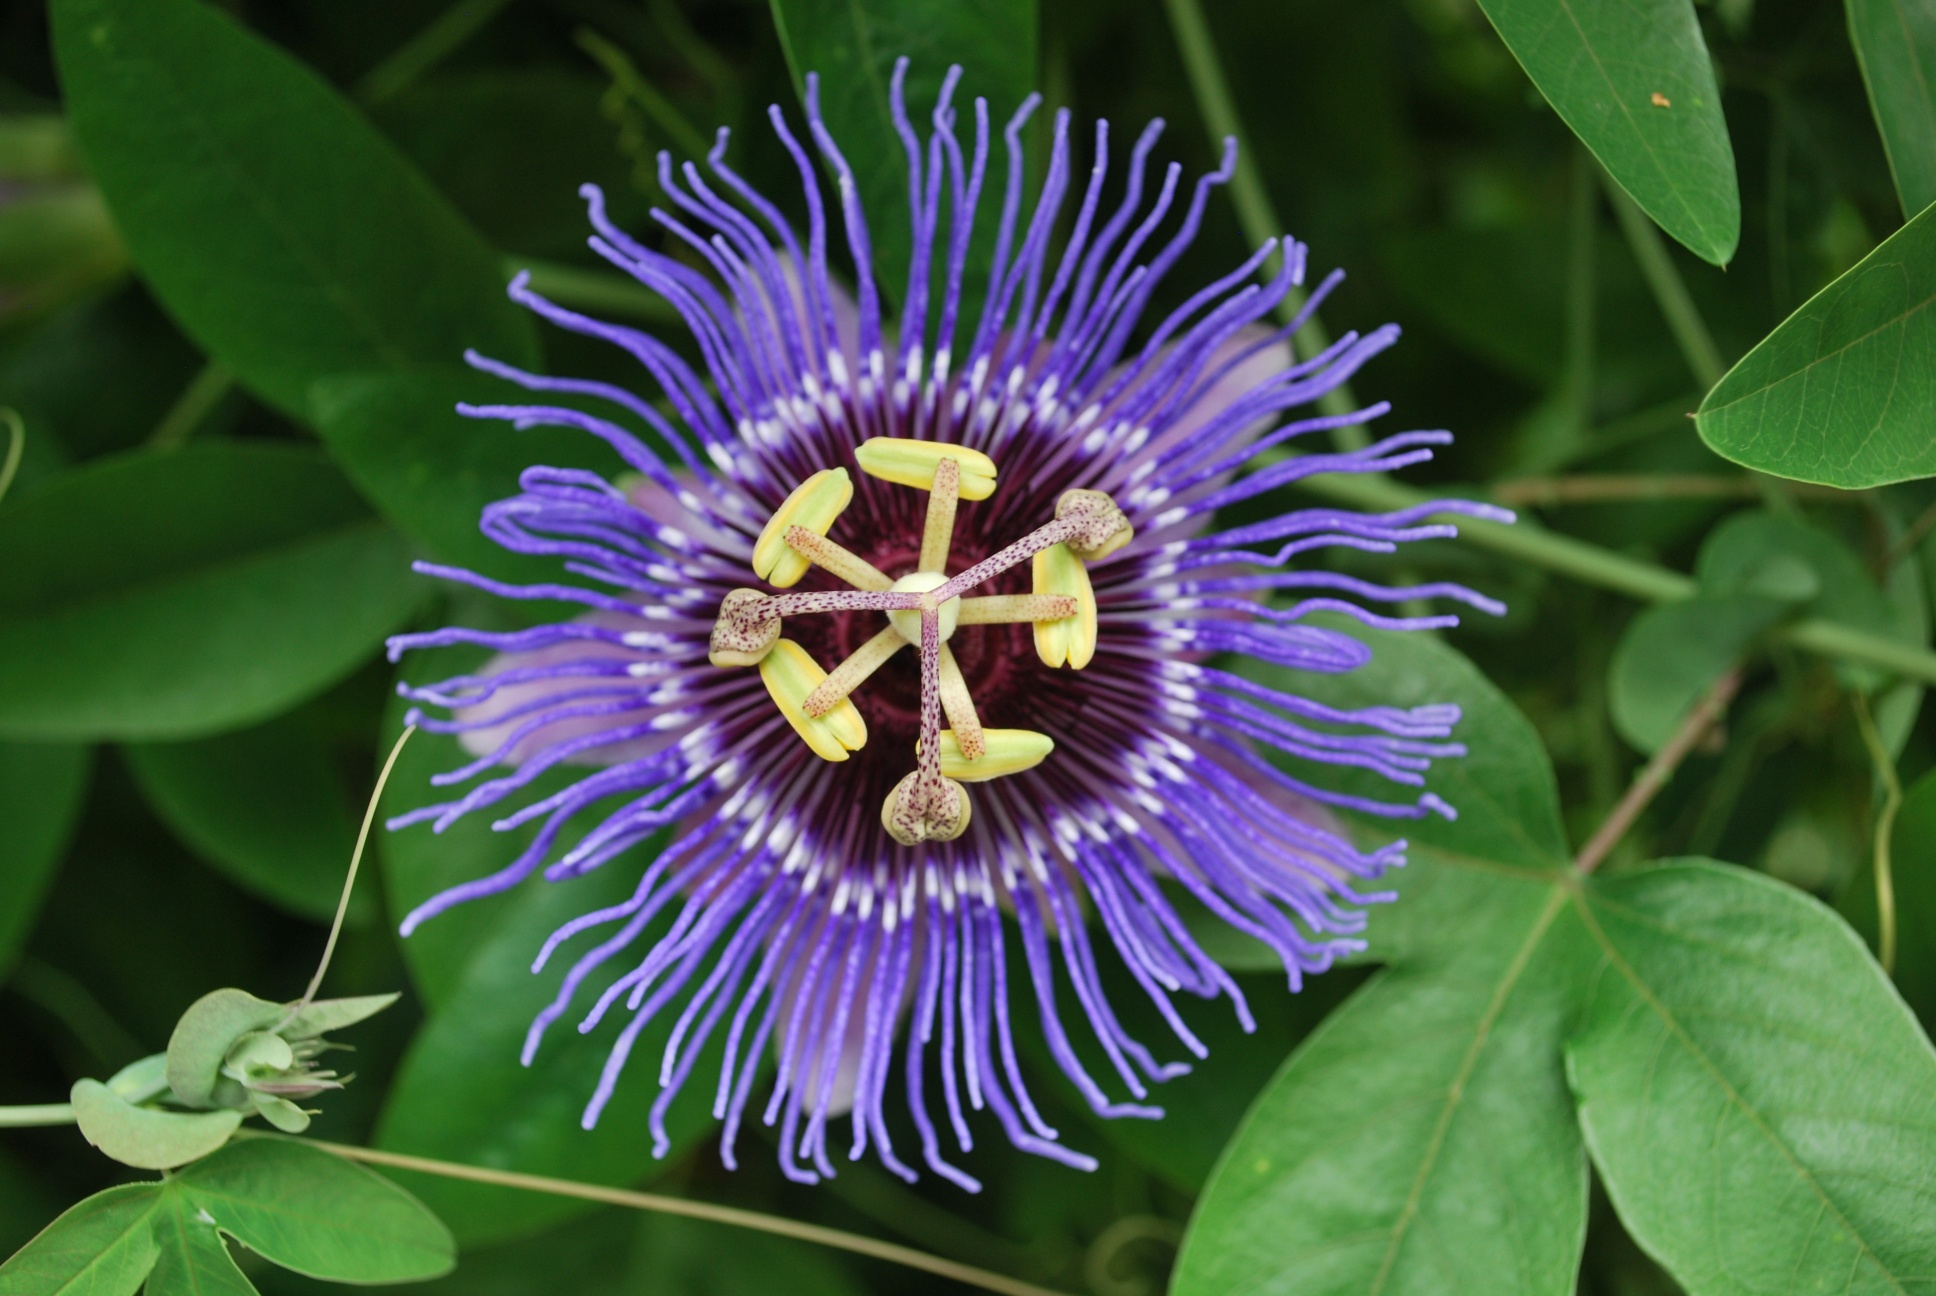 Another take on the passion flower